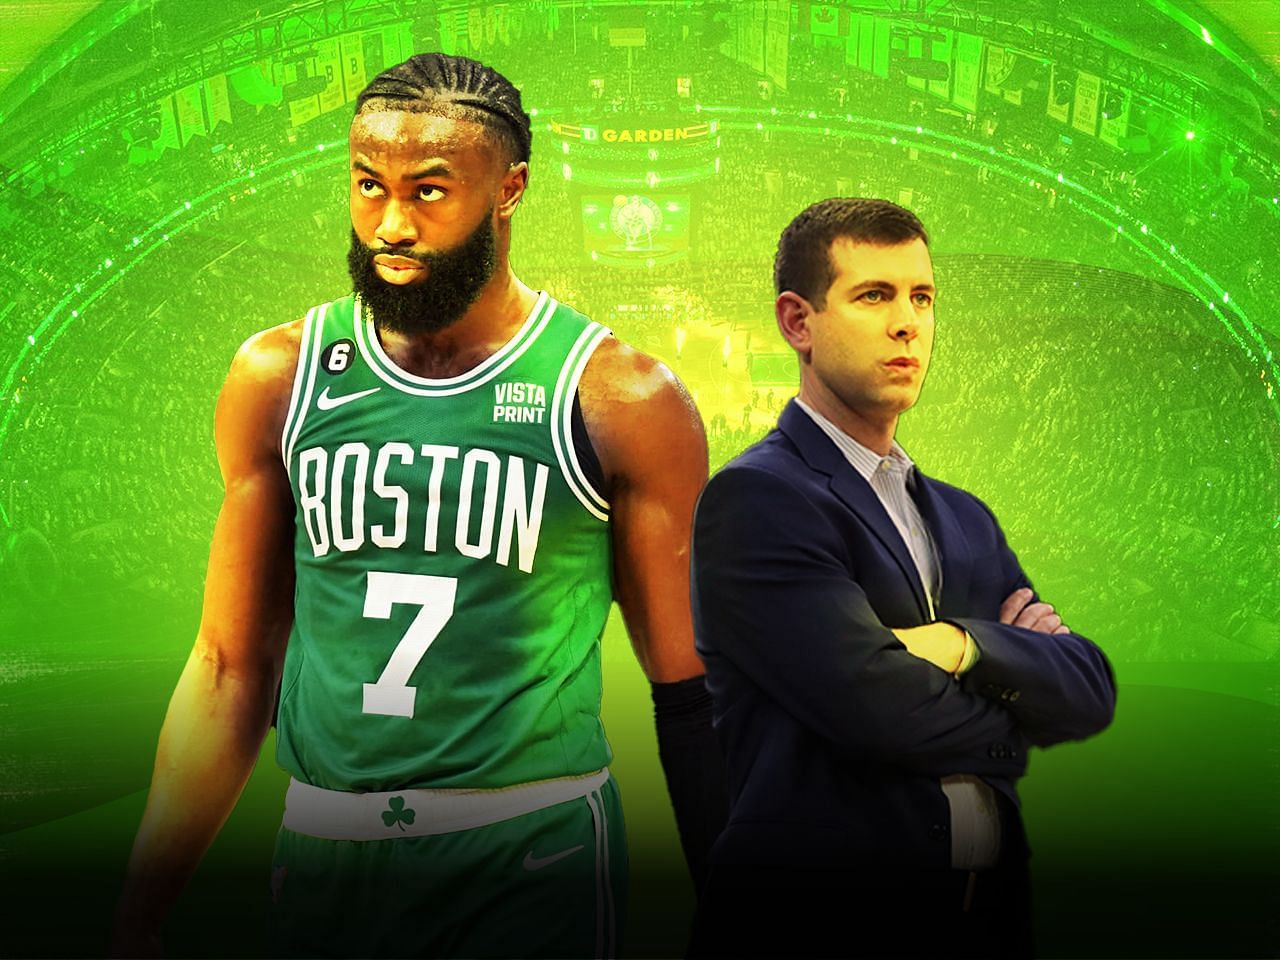 The Celtics will have to decide whether to offer Jaylen Brown the supermax